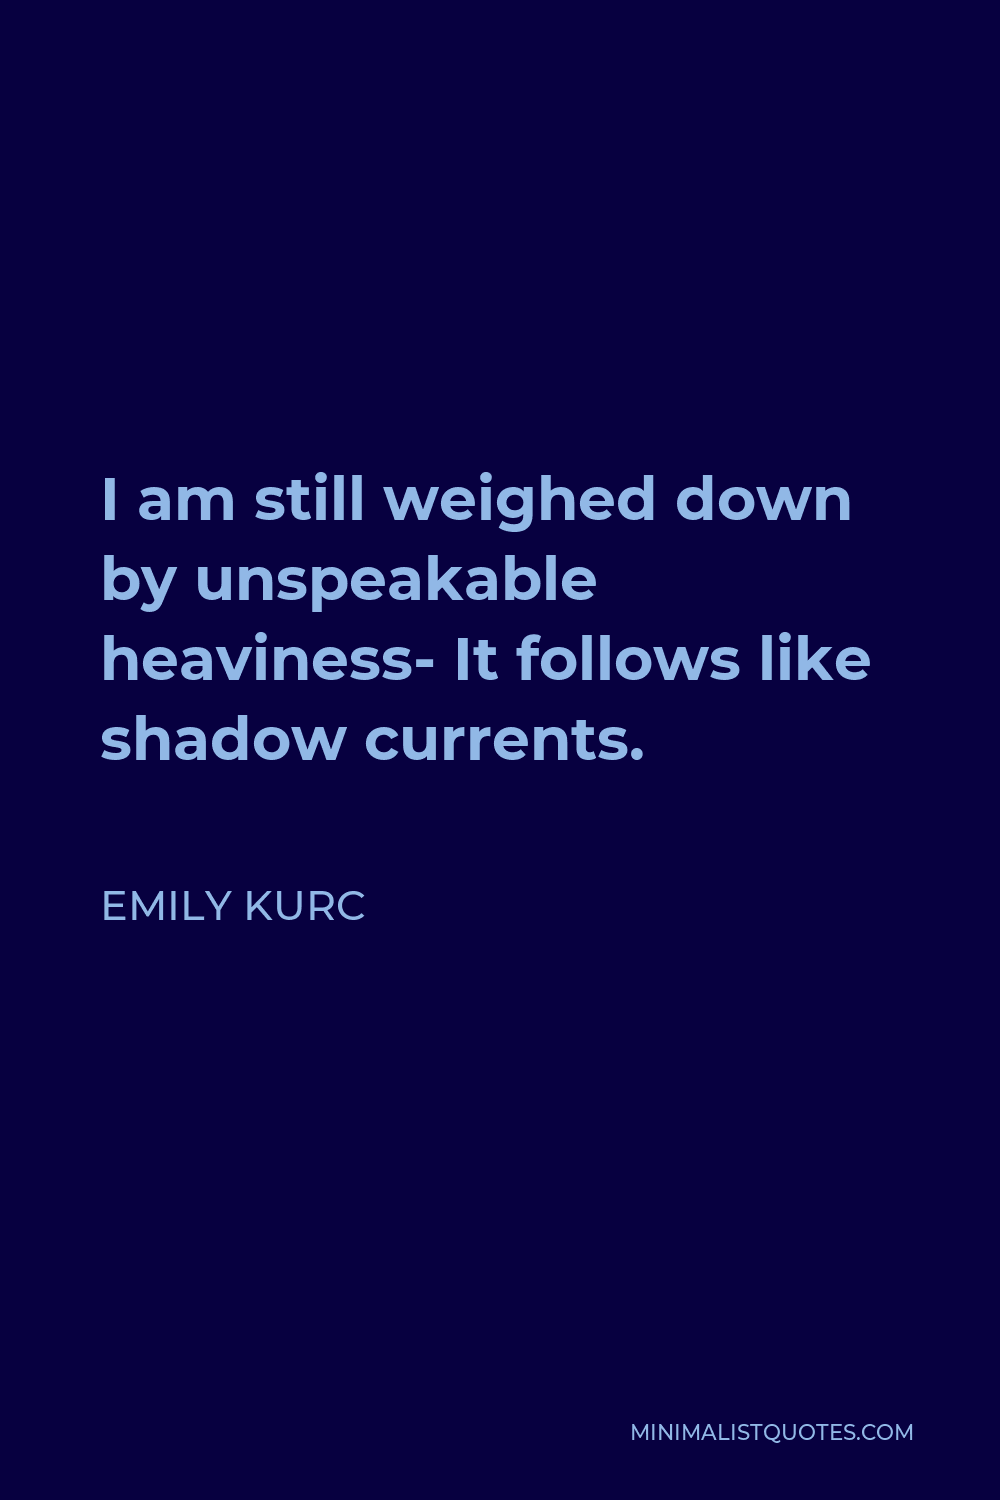 Emily Kurc Quote - I am still weighed down by unspeakable heaviness- It follows like shadow currents.